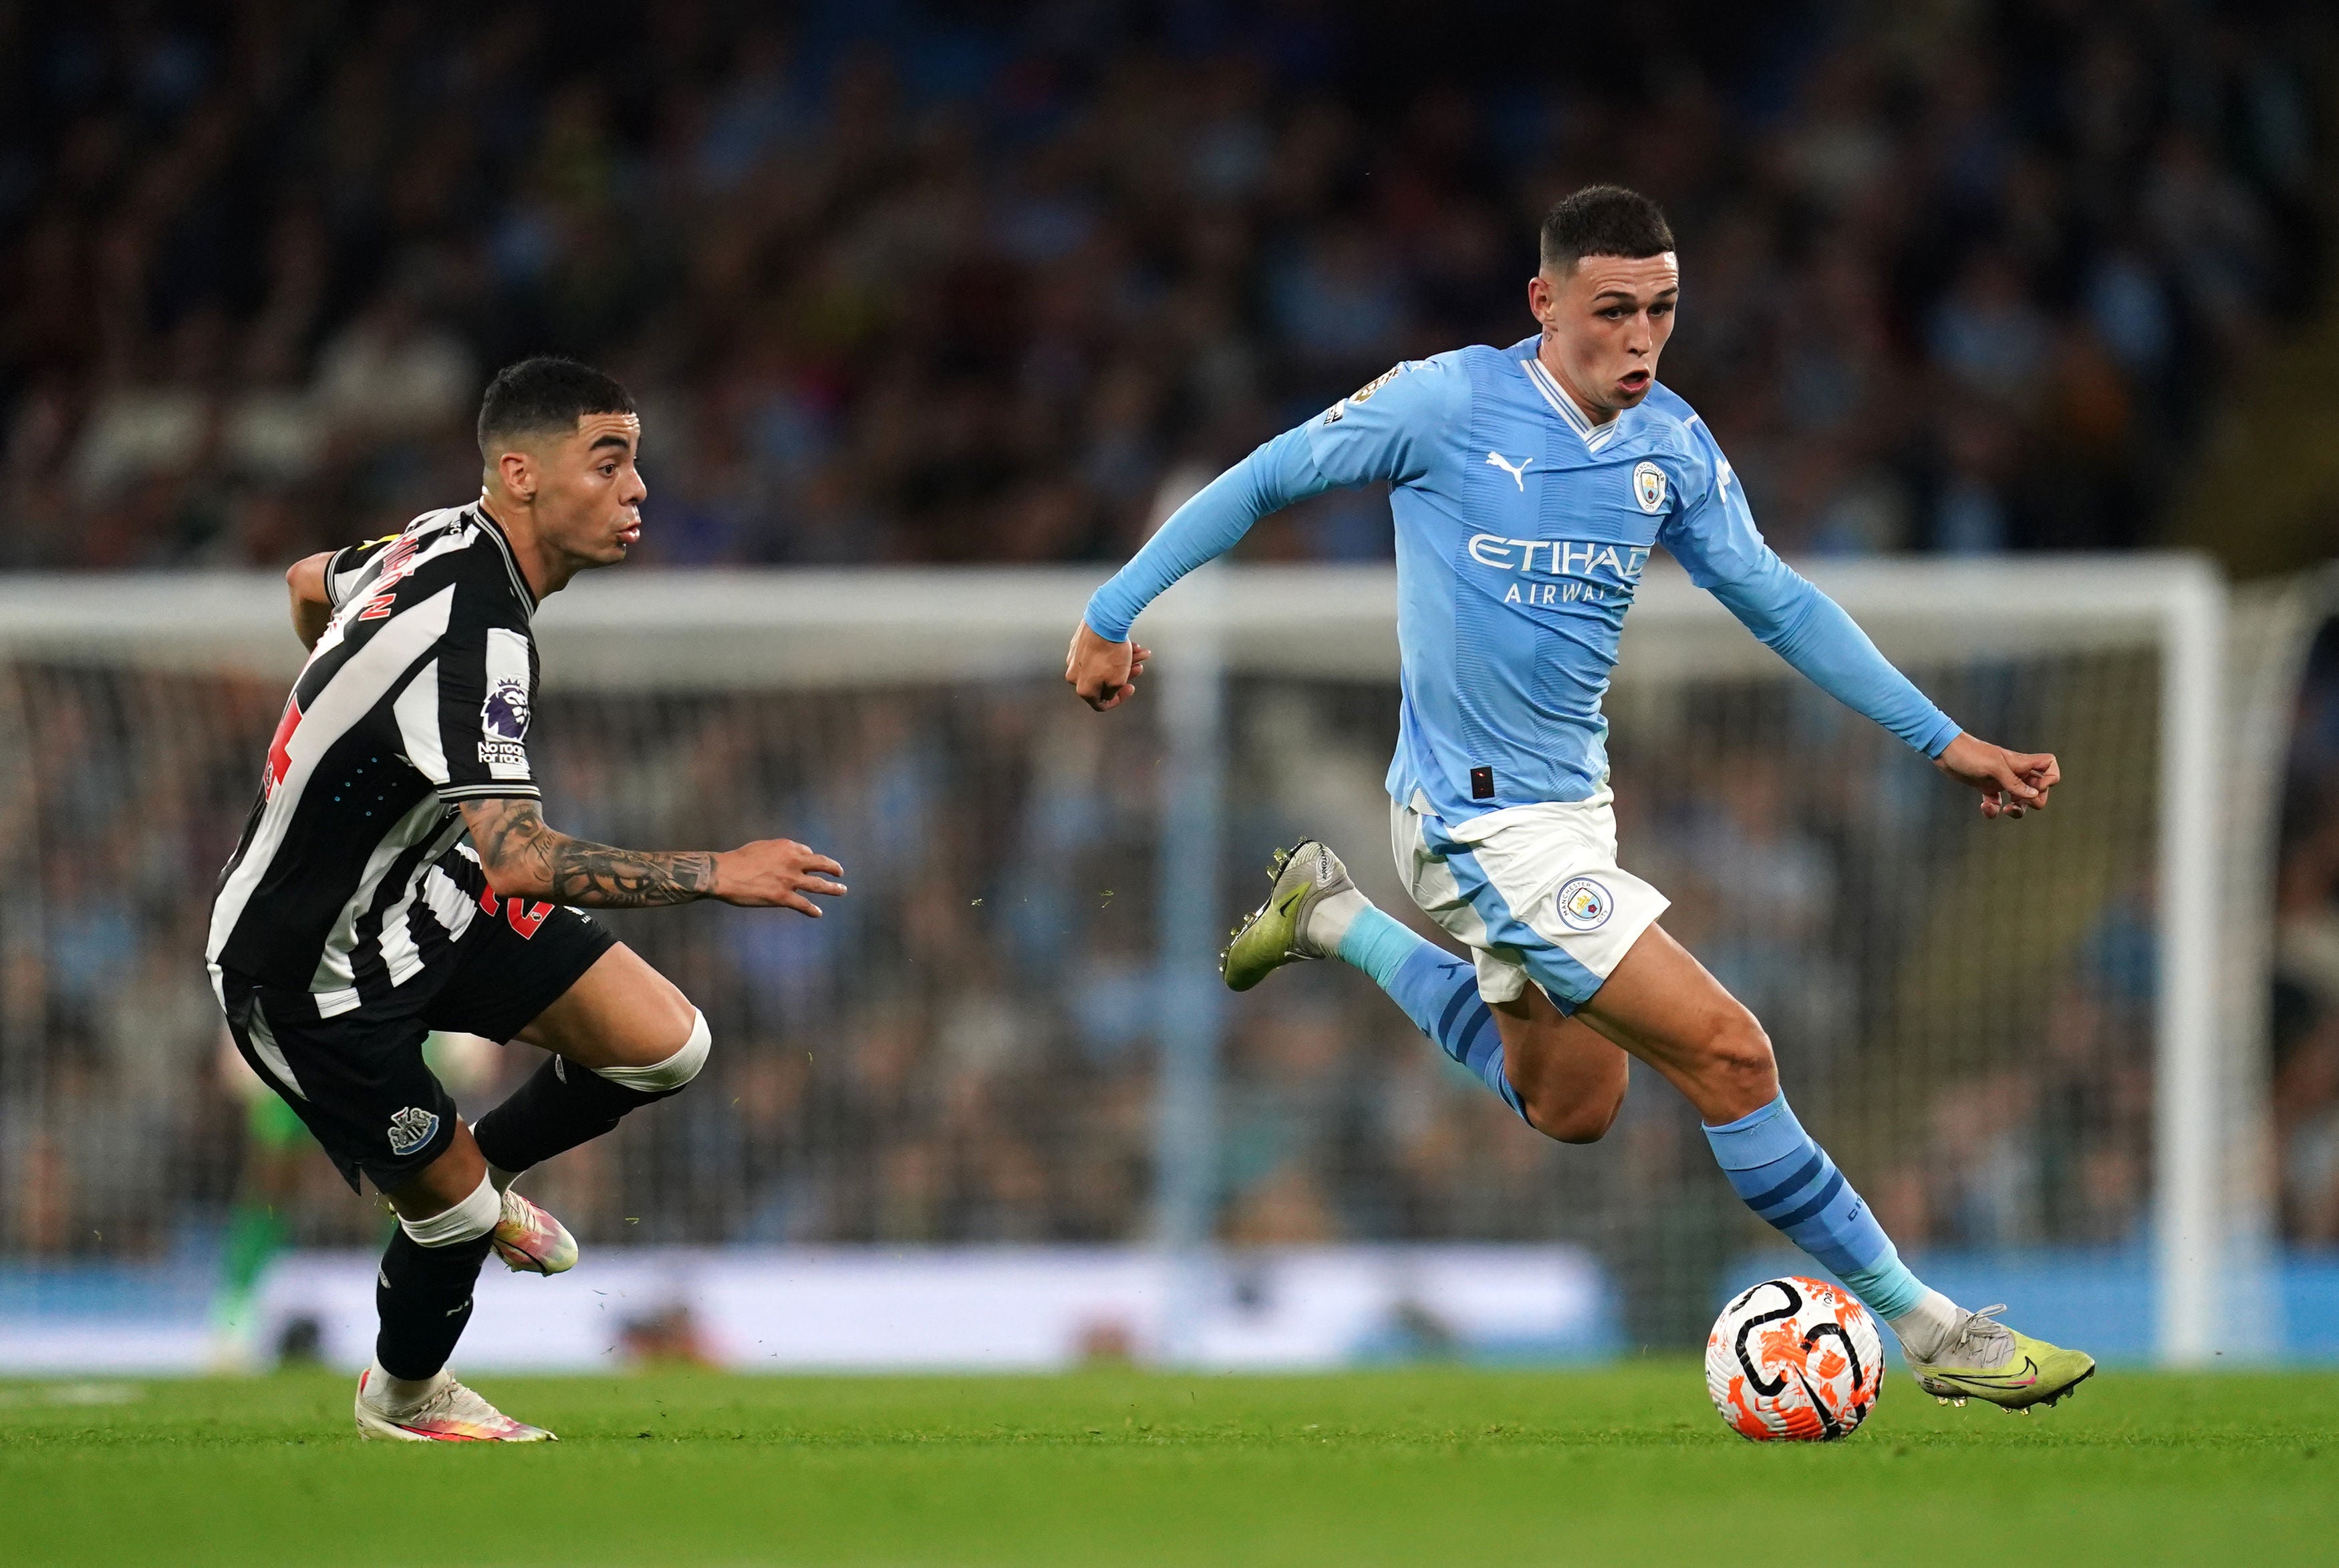  Phil Foden, a young English soccer player, playing as a left winger for Manchester City, dribbles the ball past an opposing player during a match.